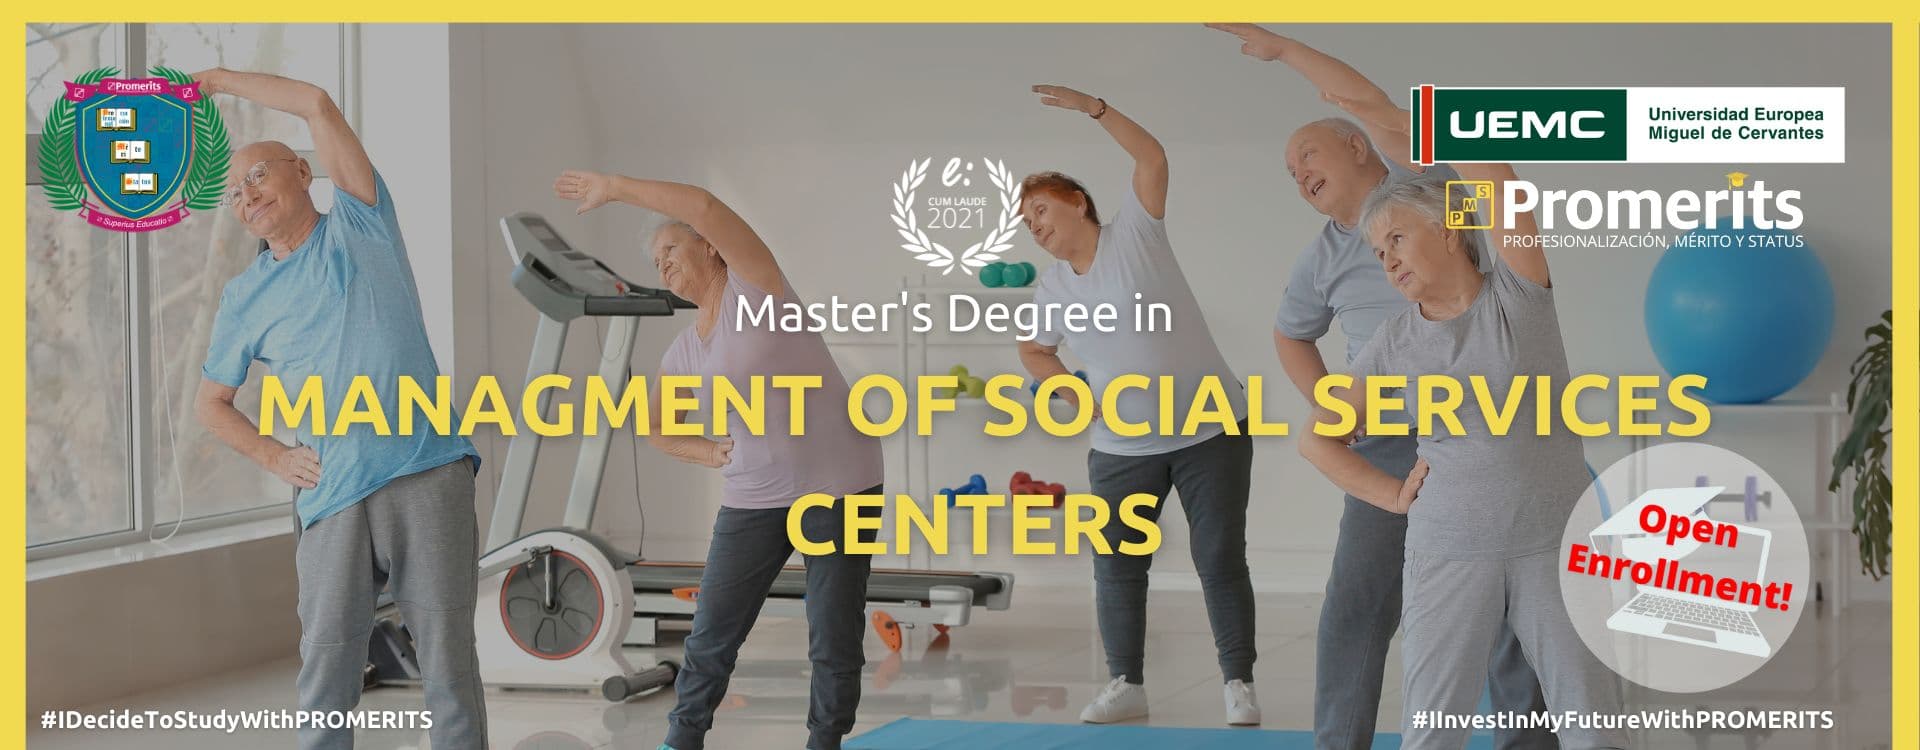 Master´s Degree in Management of Social Services Centers